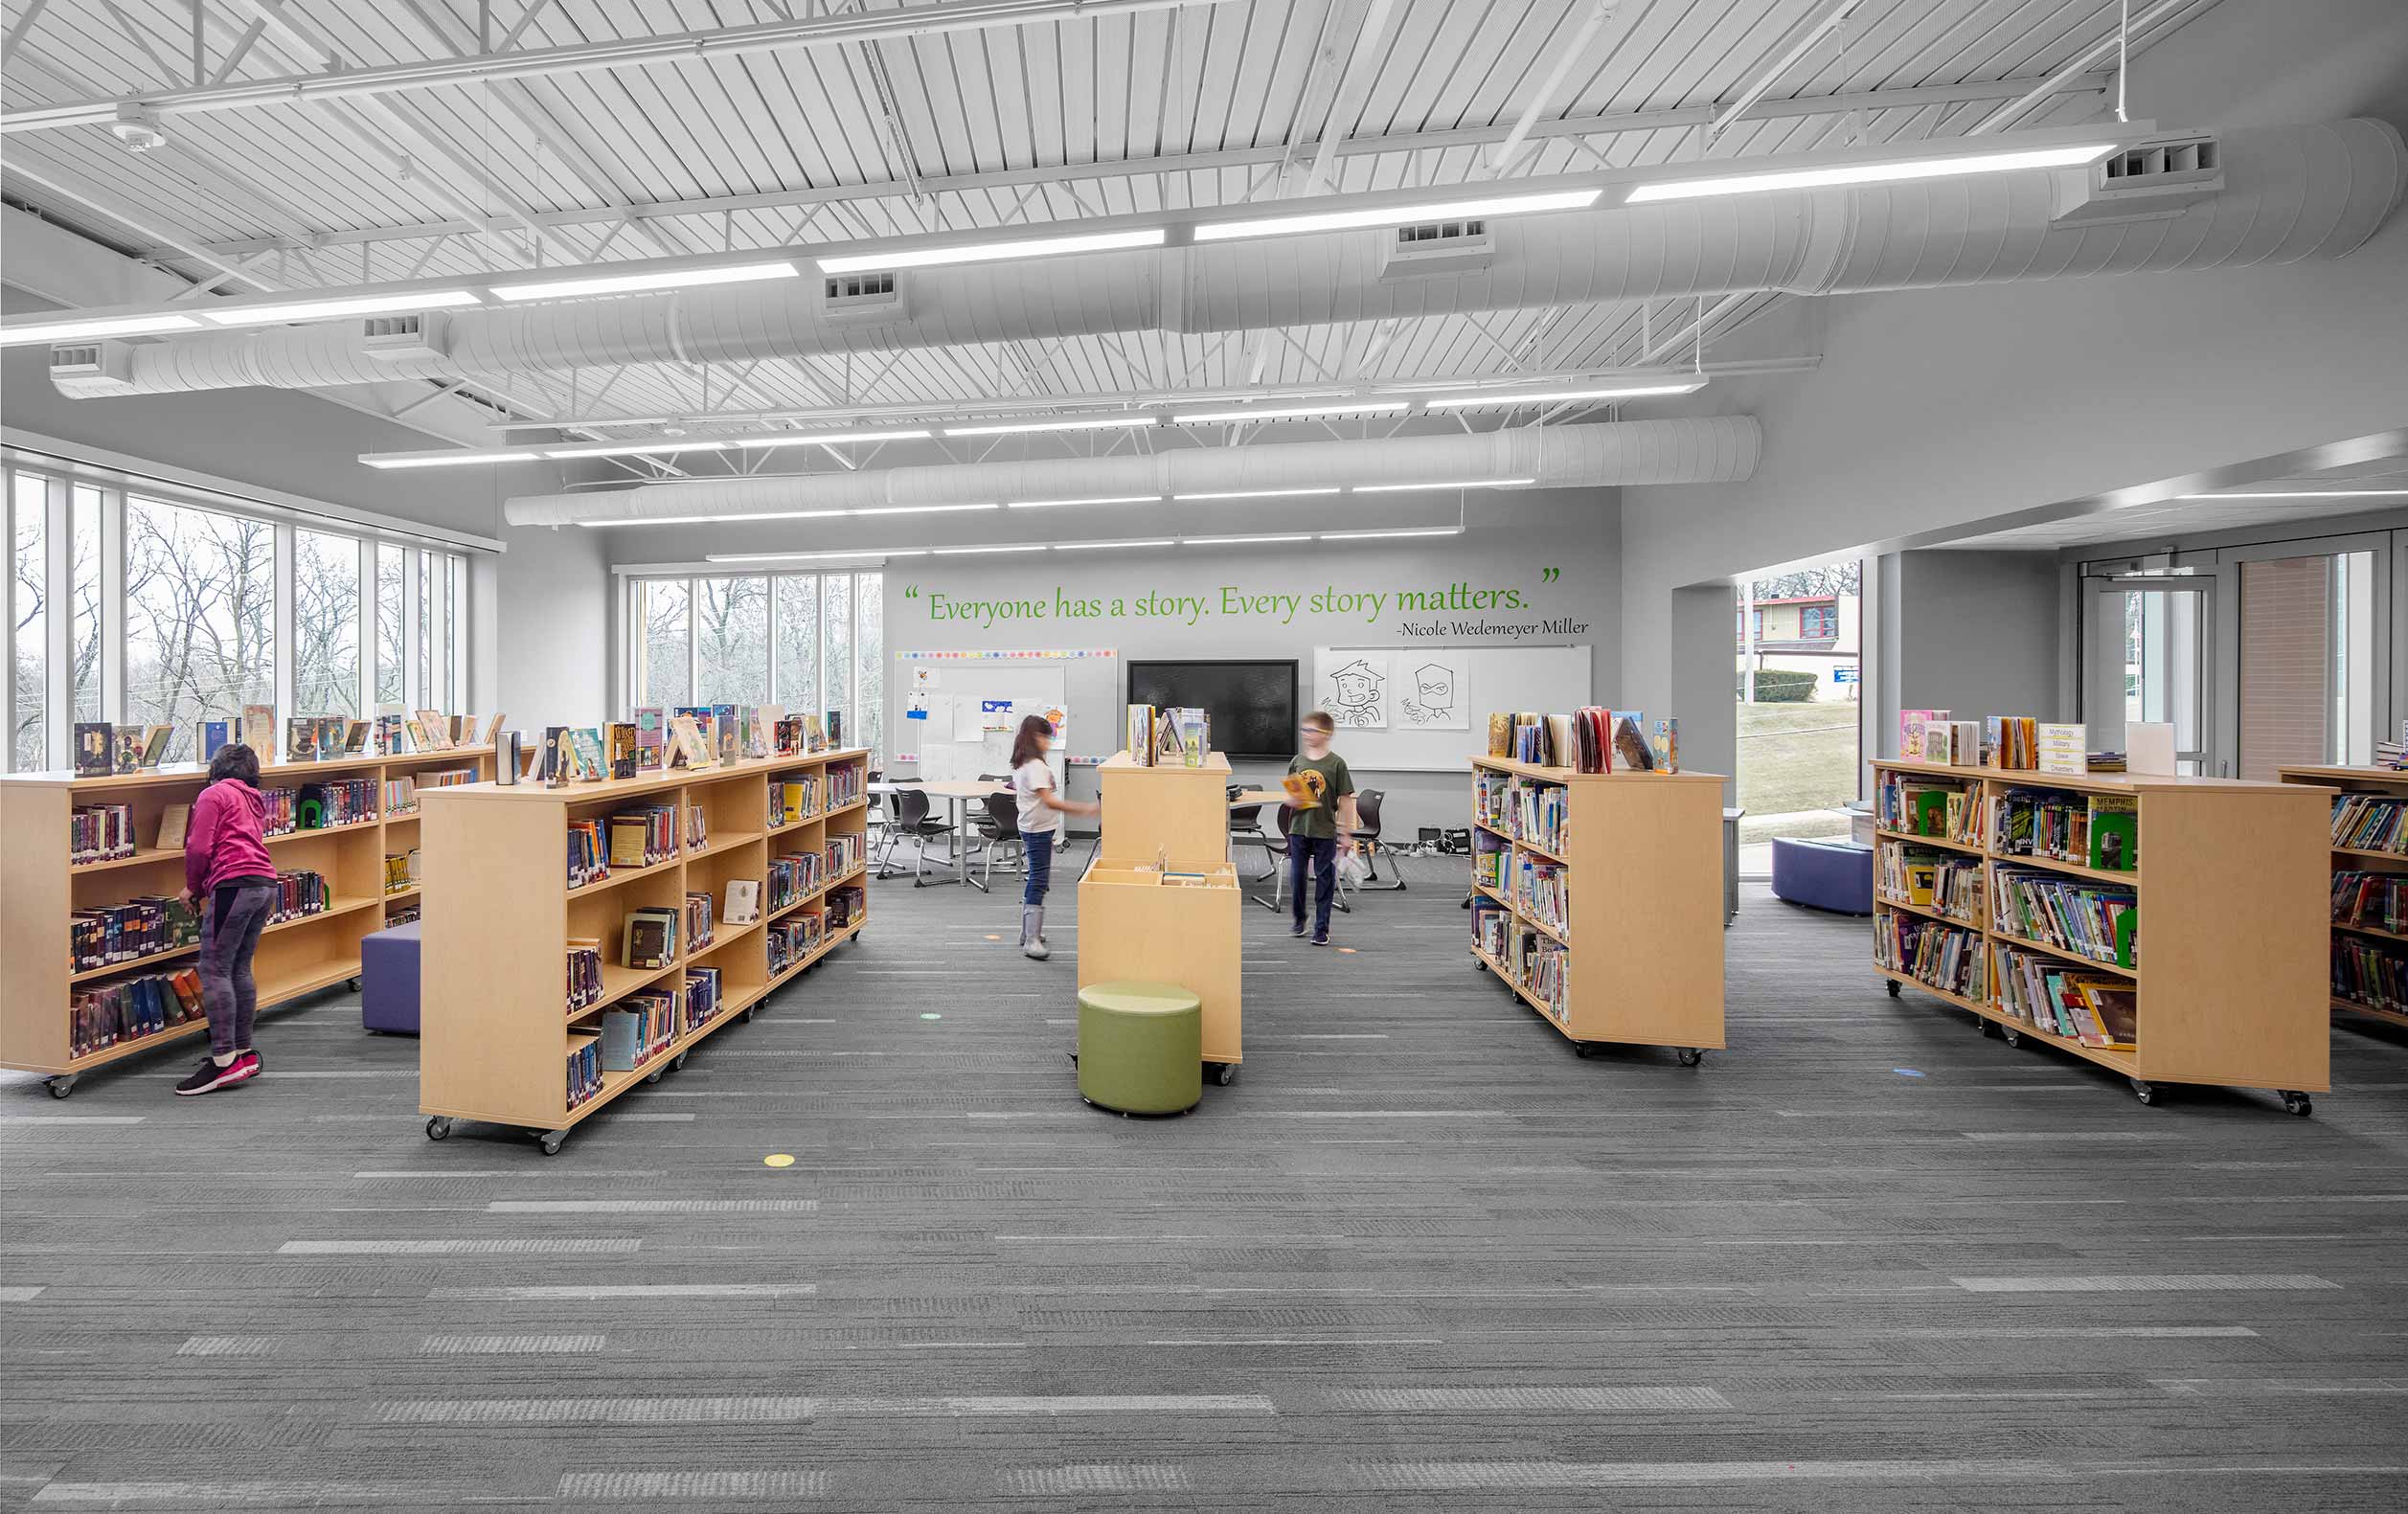 Elementary school library with students, small bookshelves, and views of trees